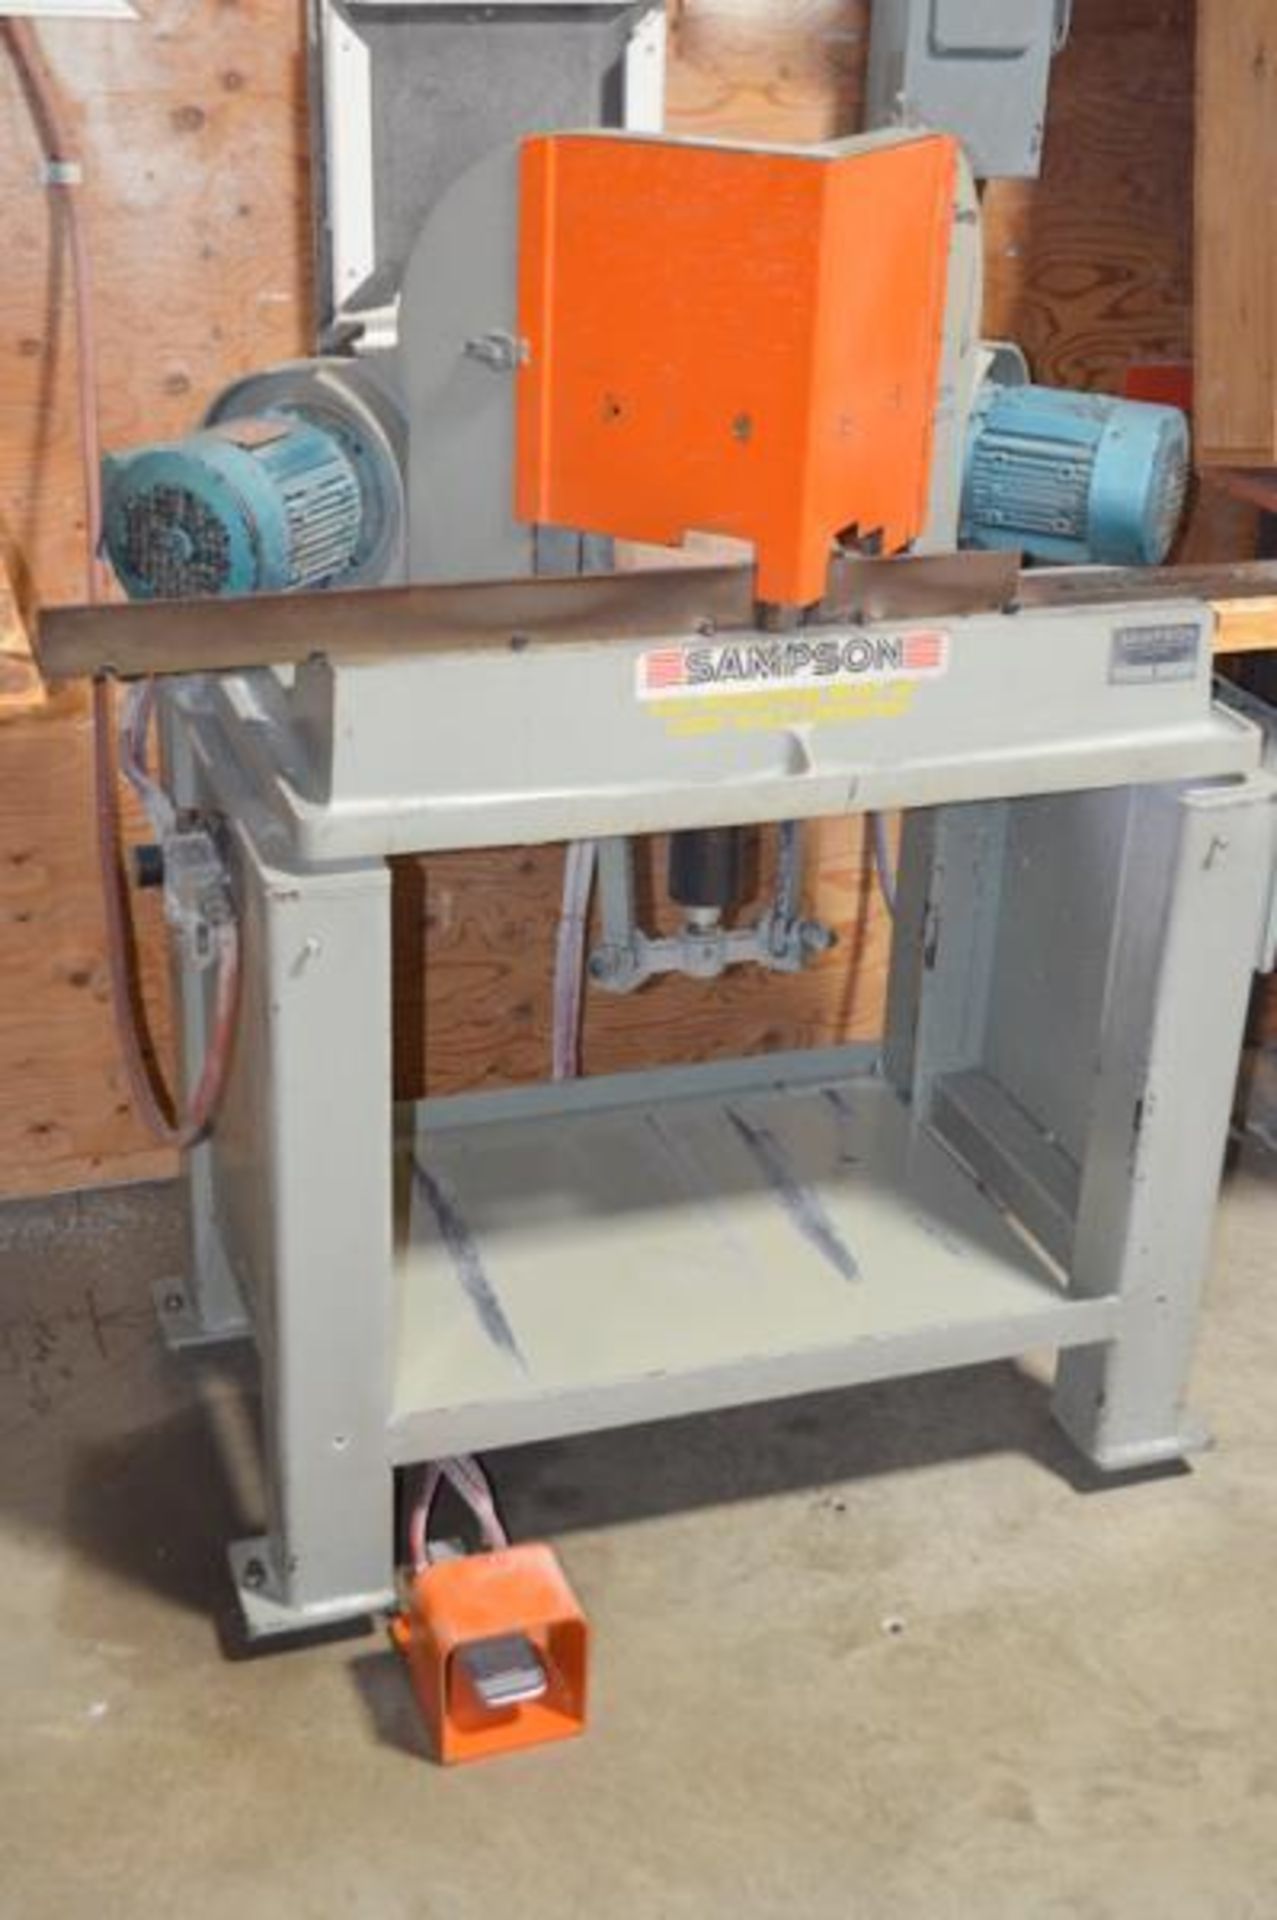 SAMPSON MN 12 12” DOUBLE MITER SAW, 5.75” X 31.5” X 35”H TABLE SIZE, CUTTING CAP. 5.5”H X 1”W AT MAX - Image 2 of 6